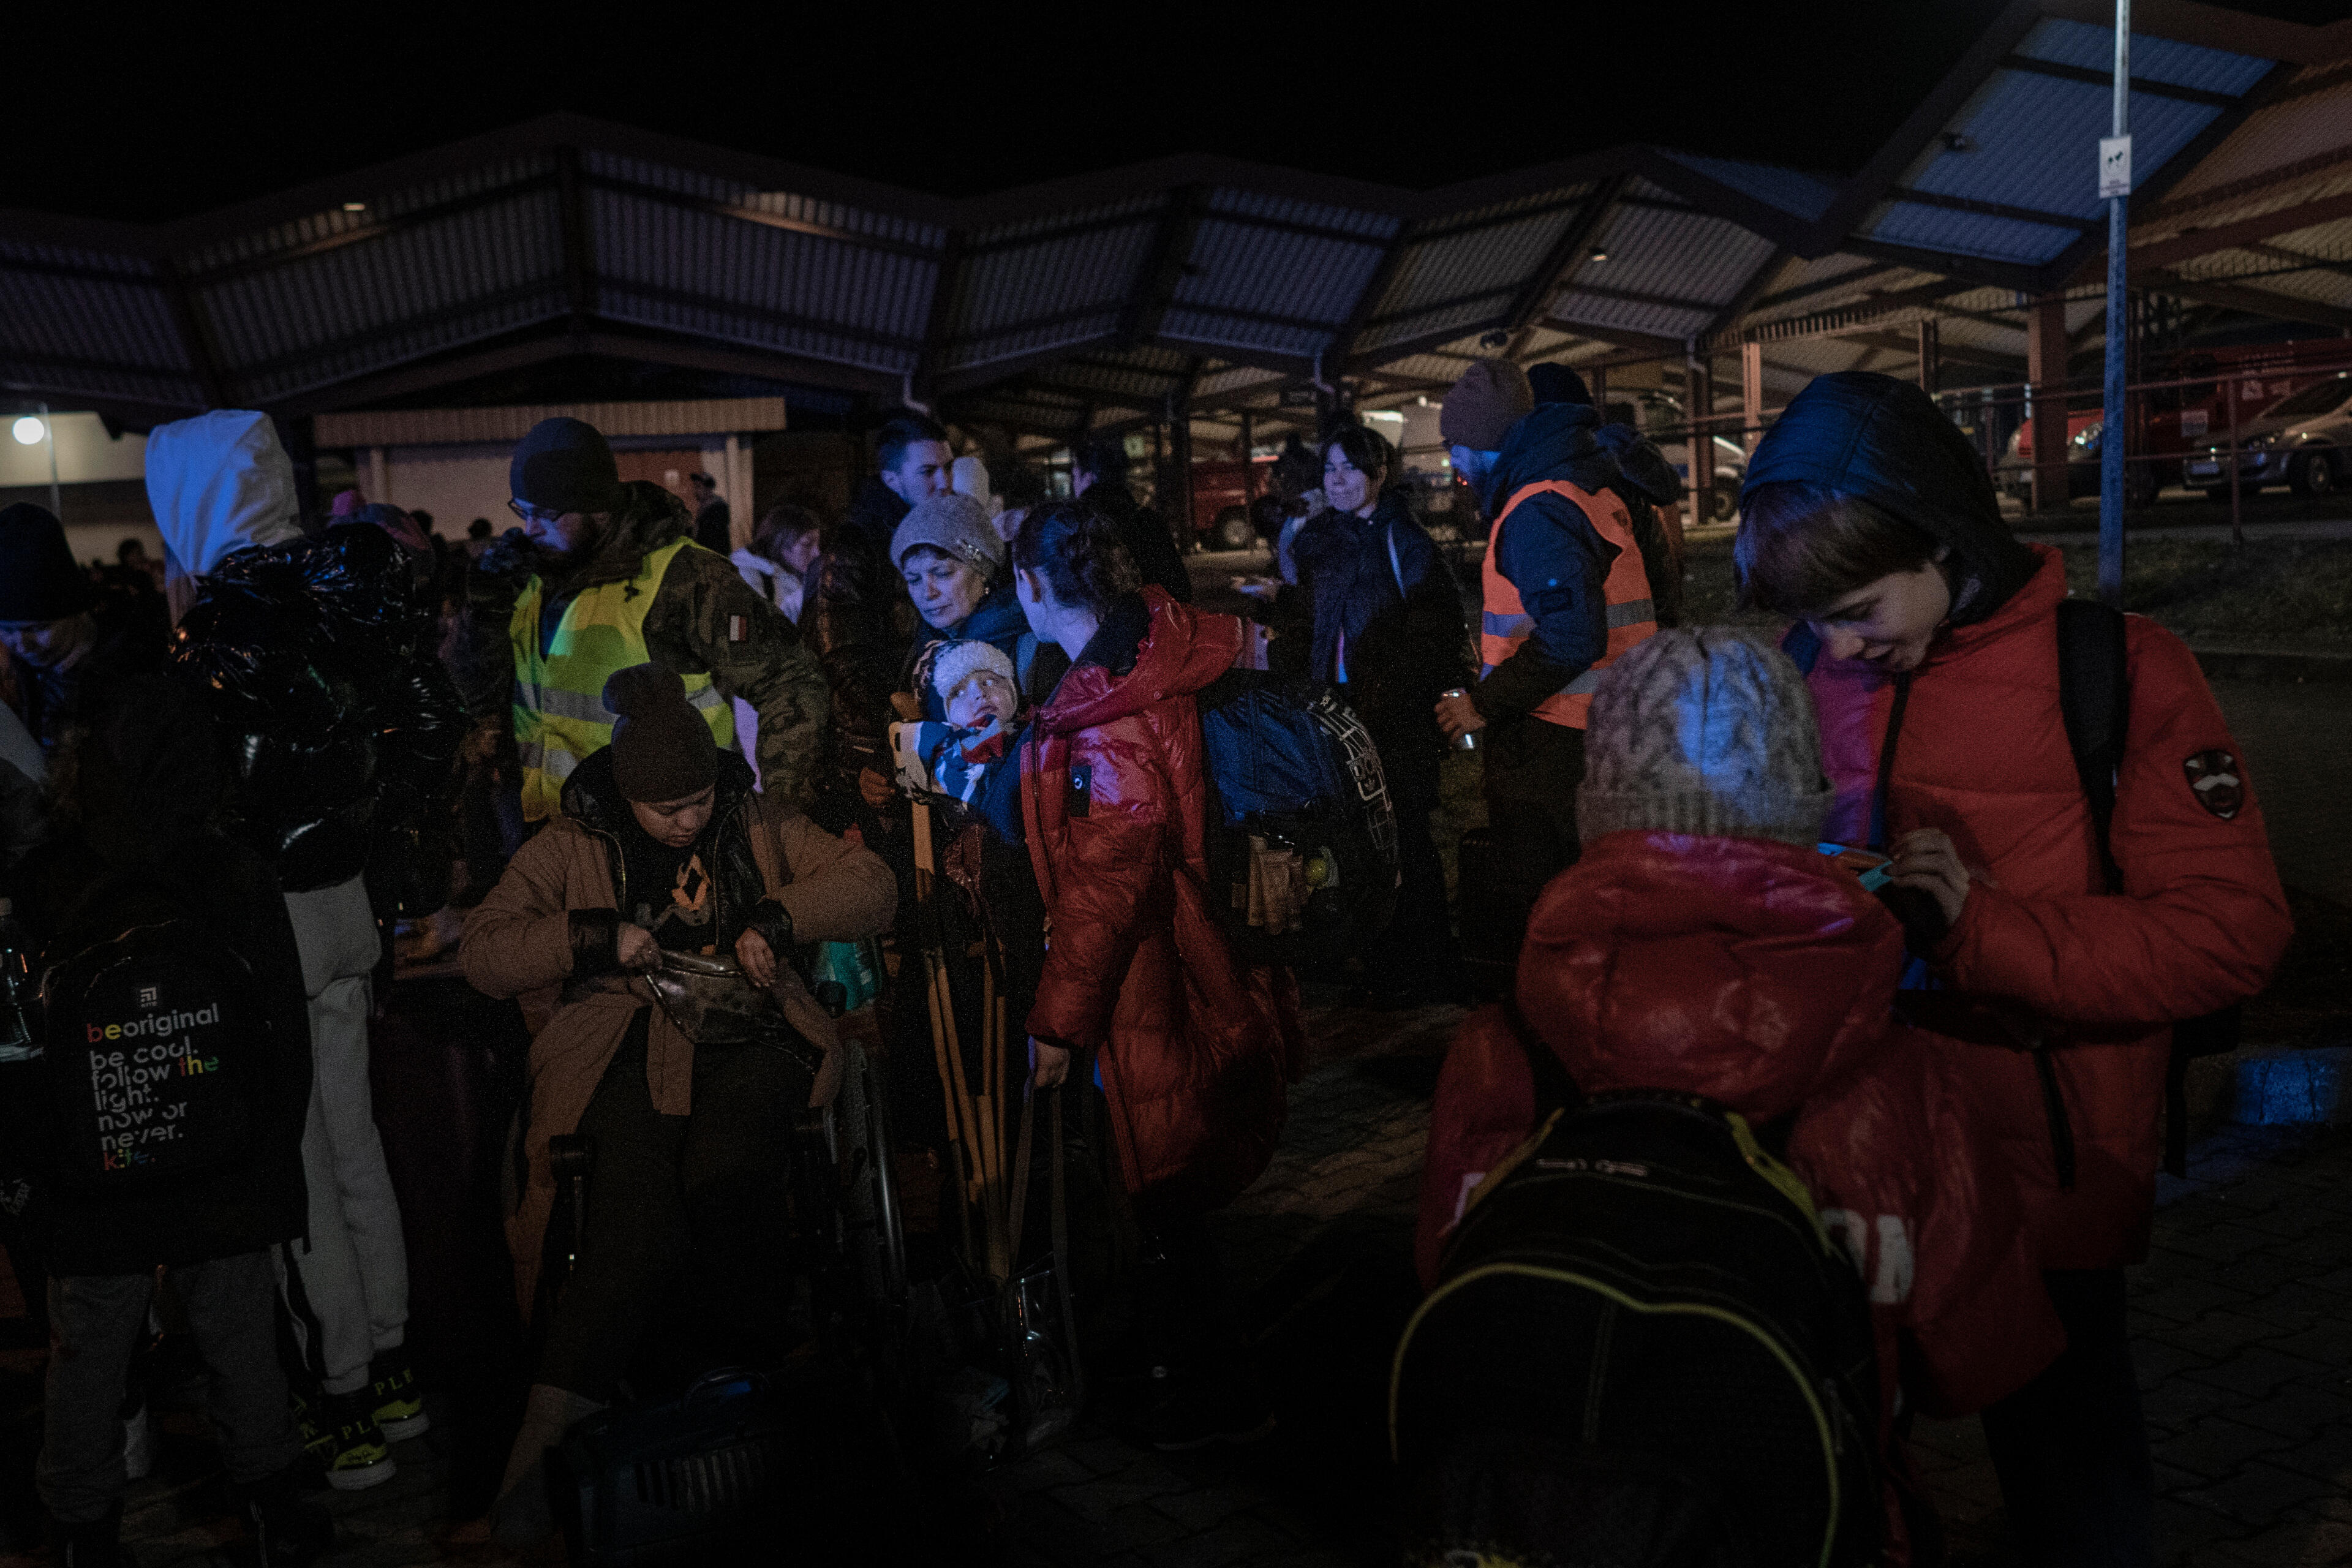 A group of refugees from Ukraine wait at a Polish train station at night after crossing the Ukraine-Poland border